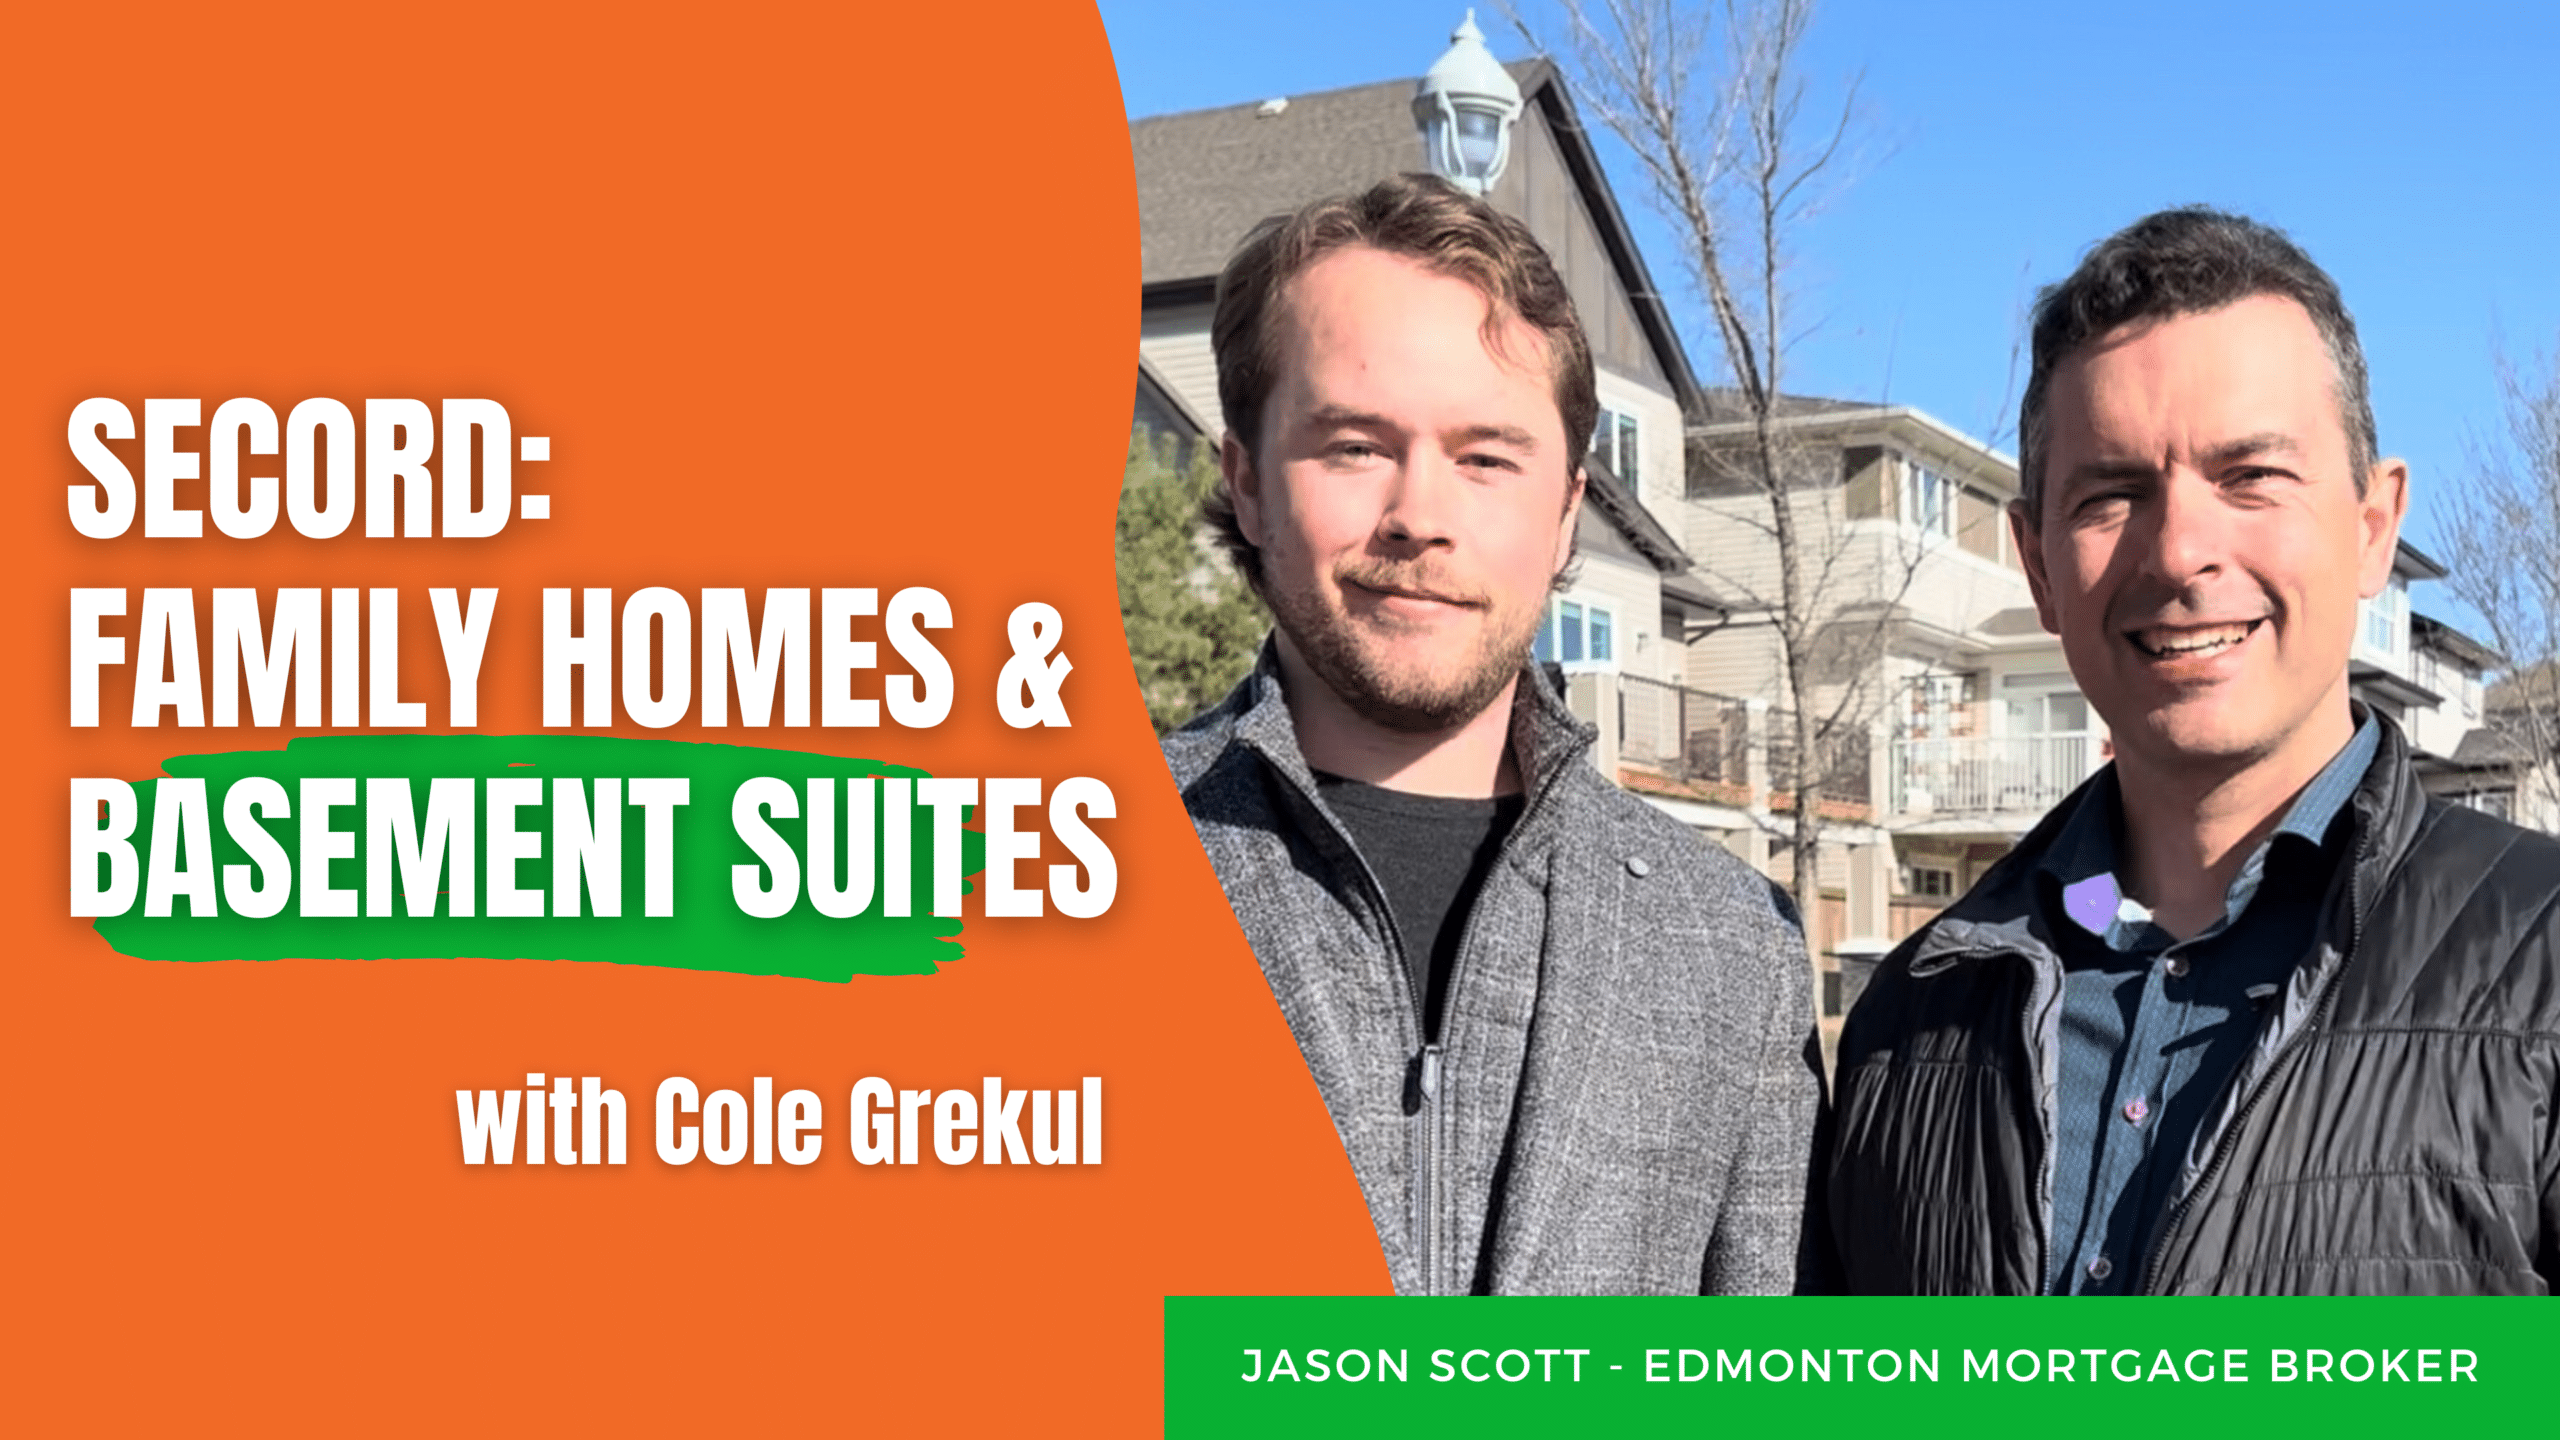 We share insights on the neighbourhood of Secord, and their family homes and basement suites.